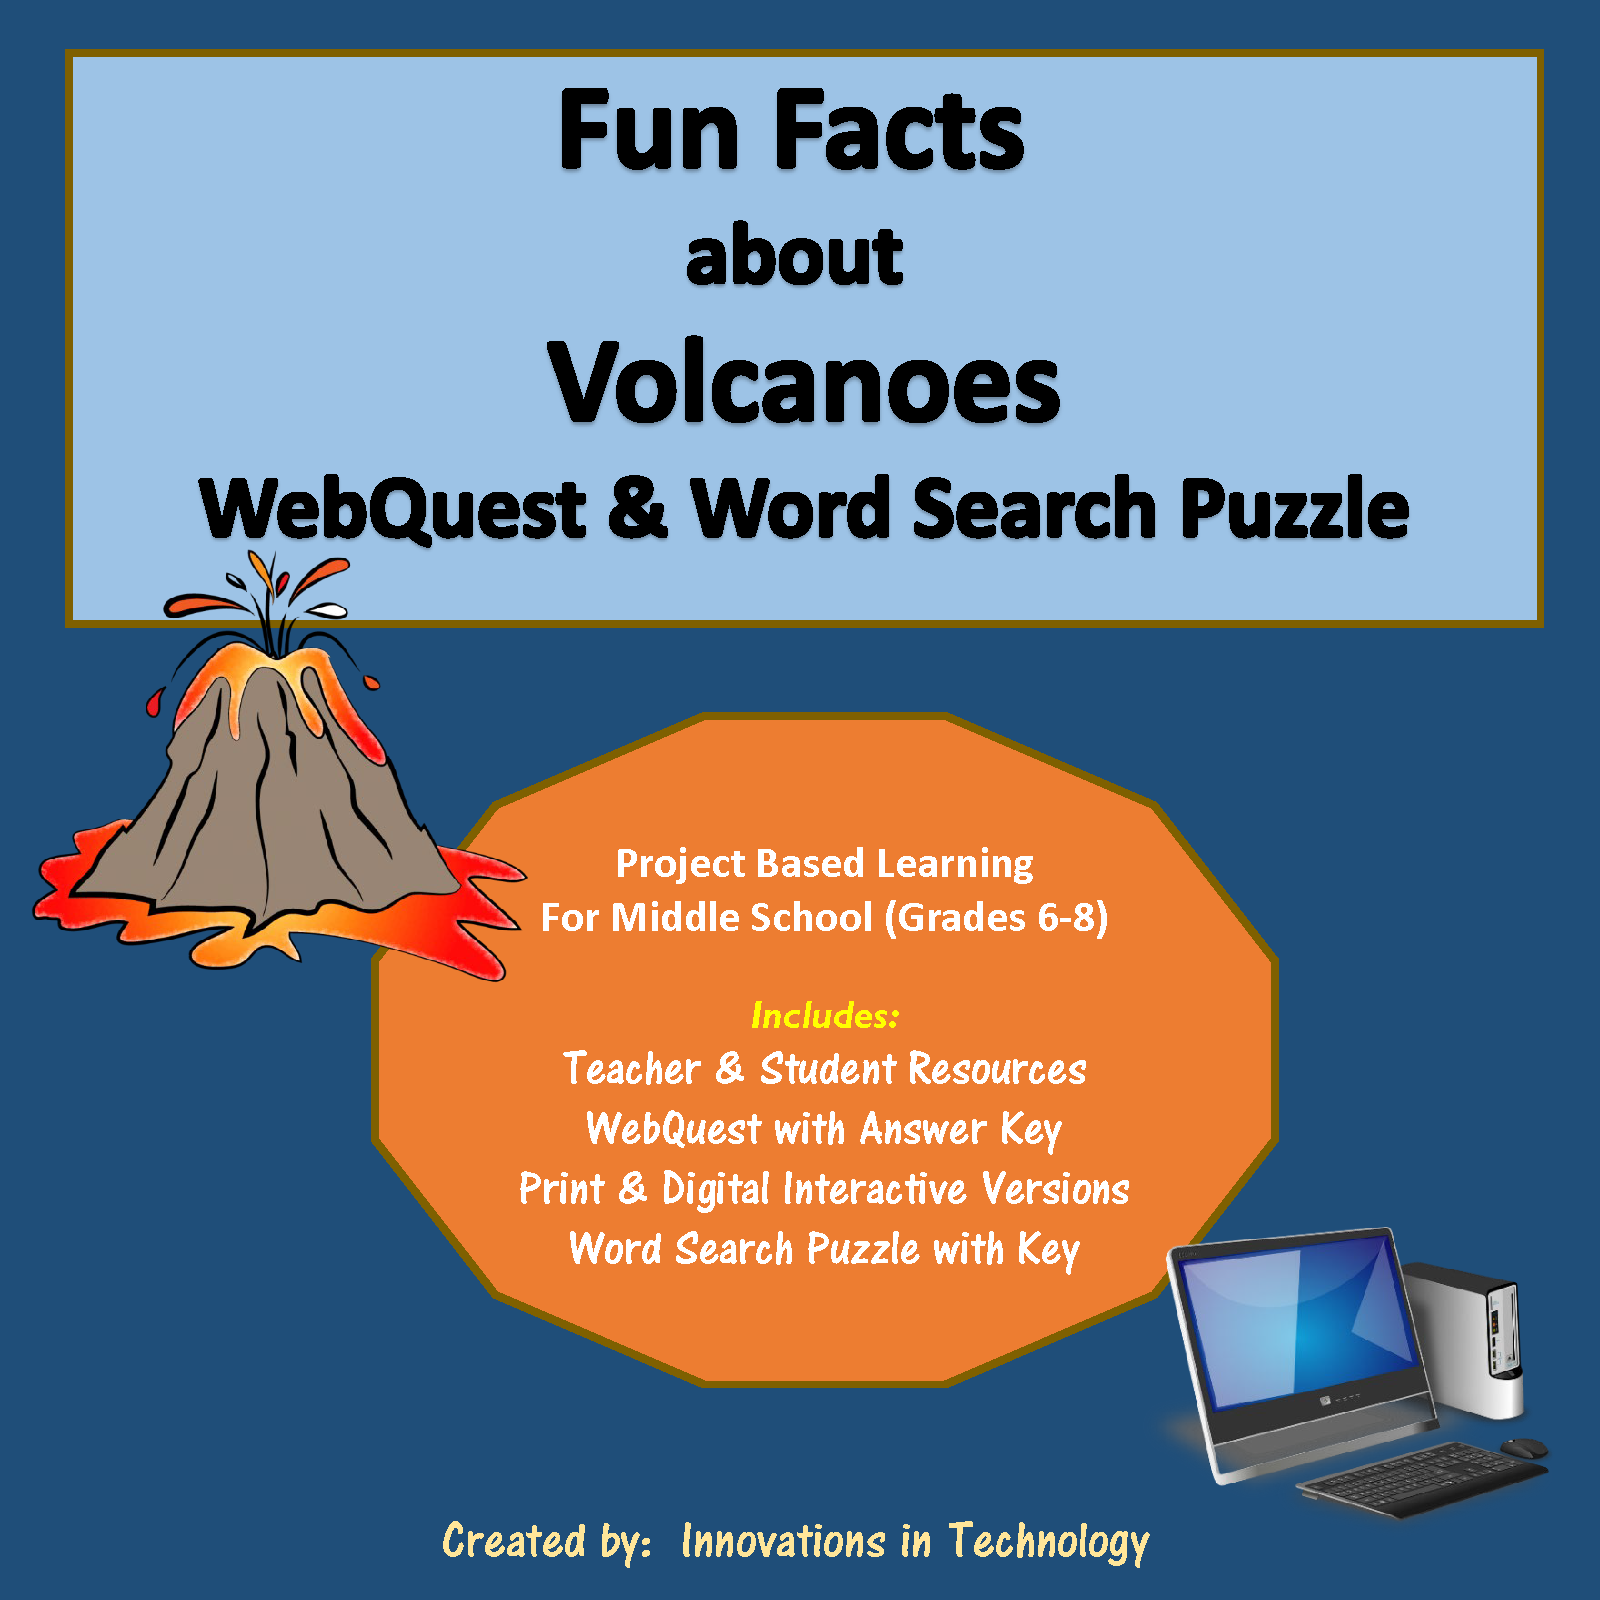 Fun Facts about Volcanoes - WebQuest & Word Search Puzzle